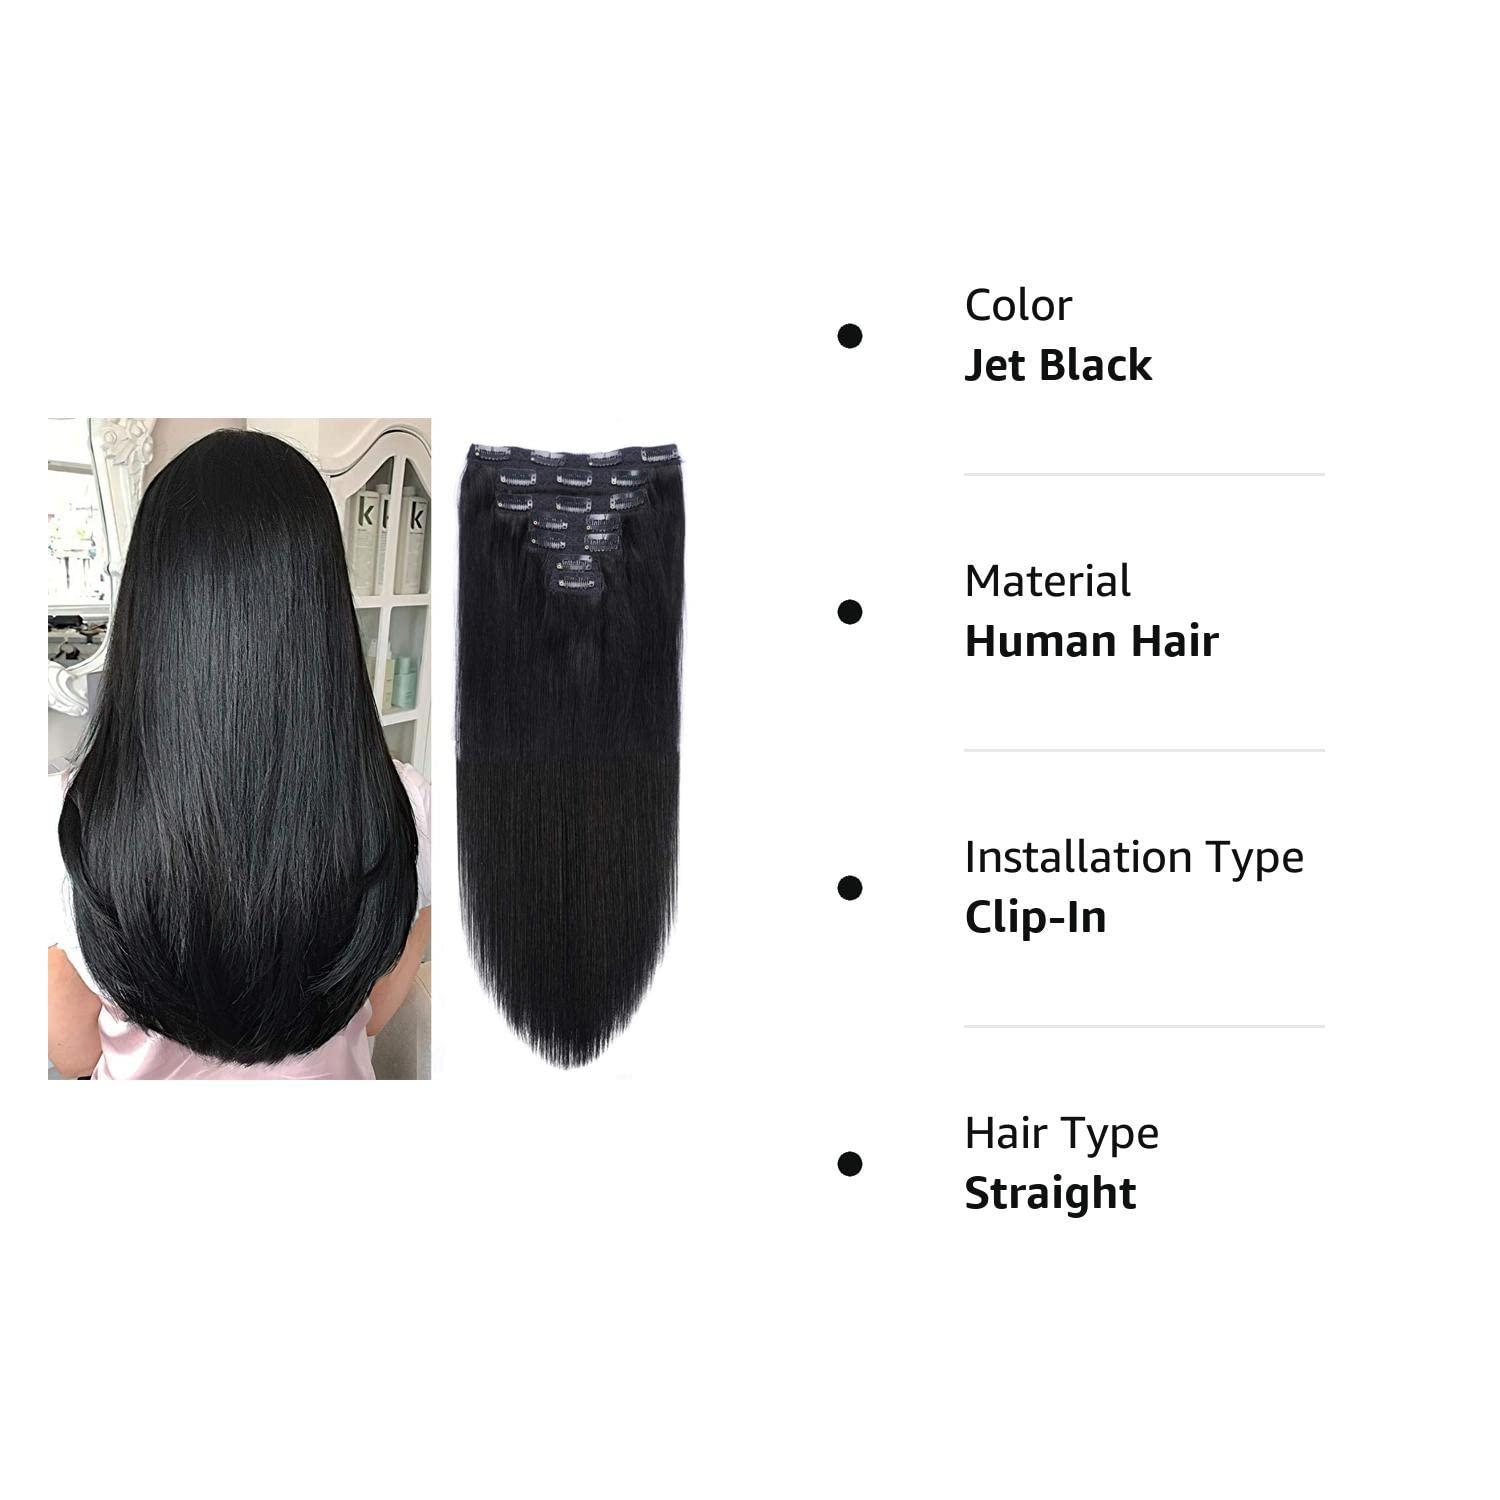 Faaal 22in Clip in Human Hair Extensions Full Head 200g 10 Pieces 22 Clips 1#Jet Black Double Weft Brazilian Real Remy Hair Extensions Thick Straight